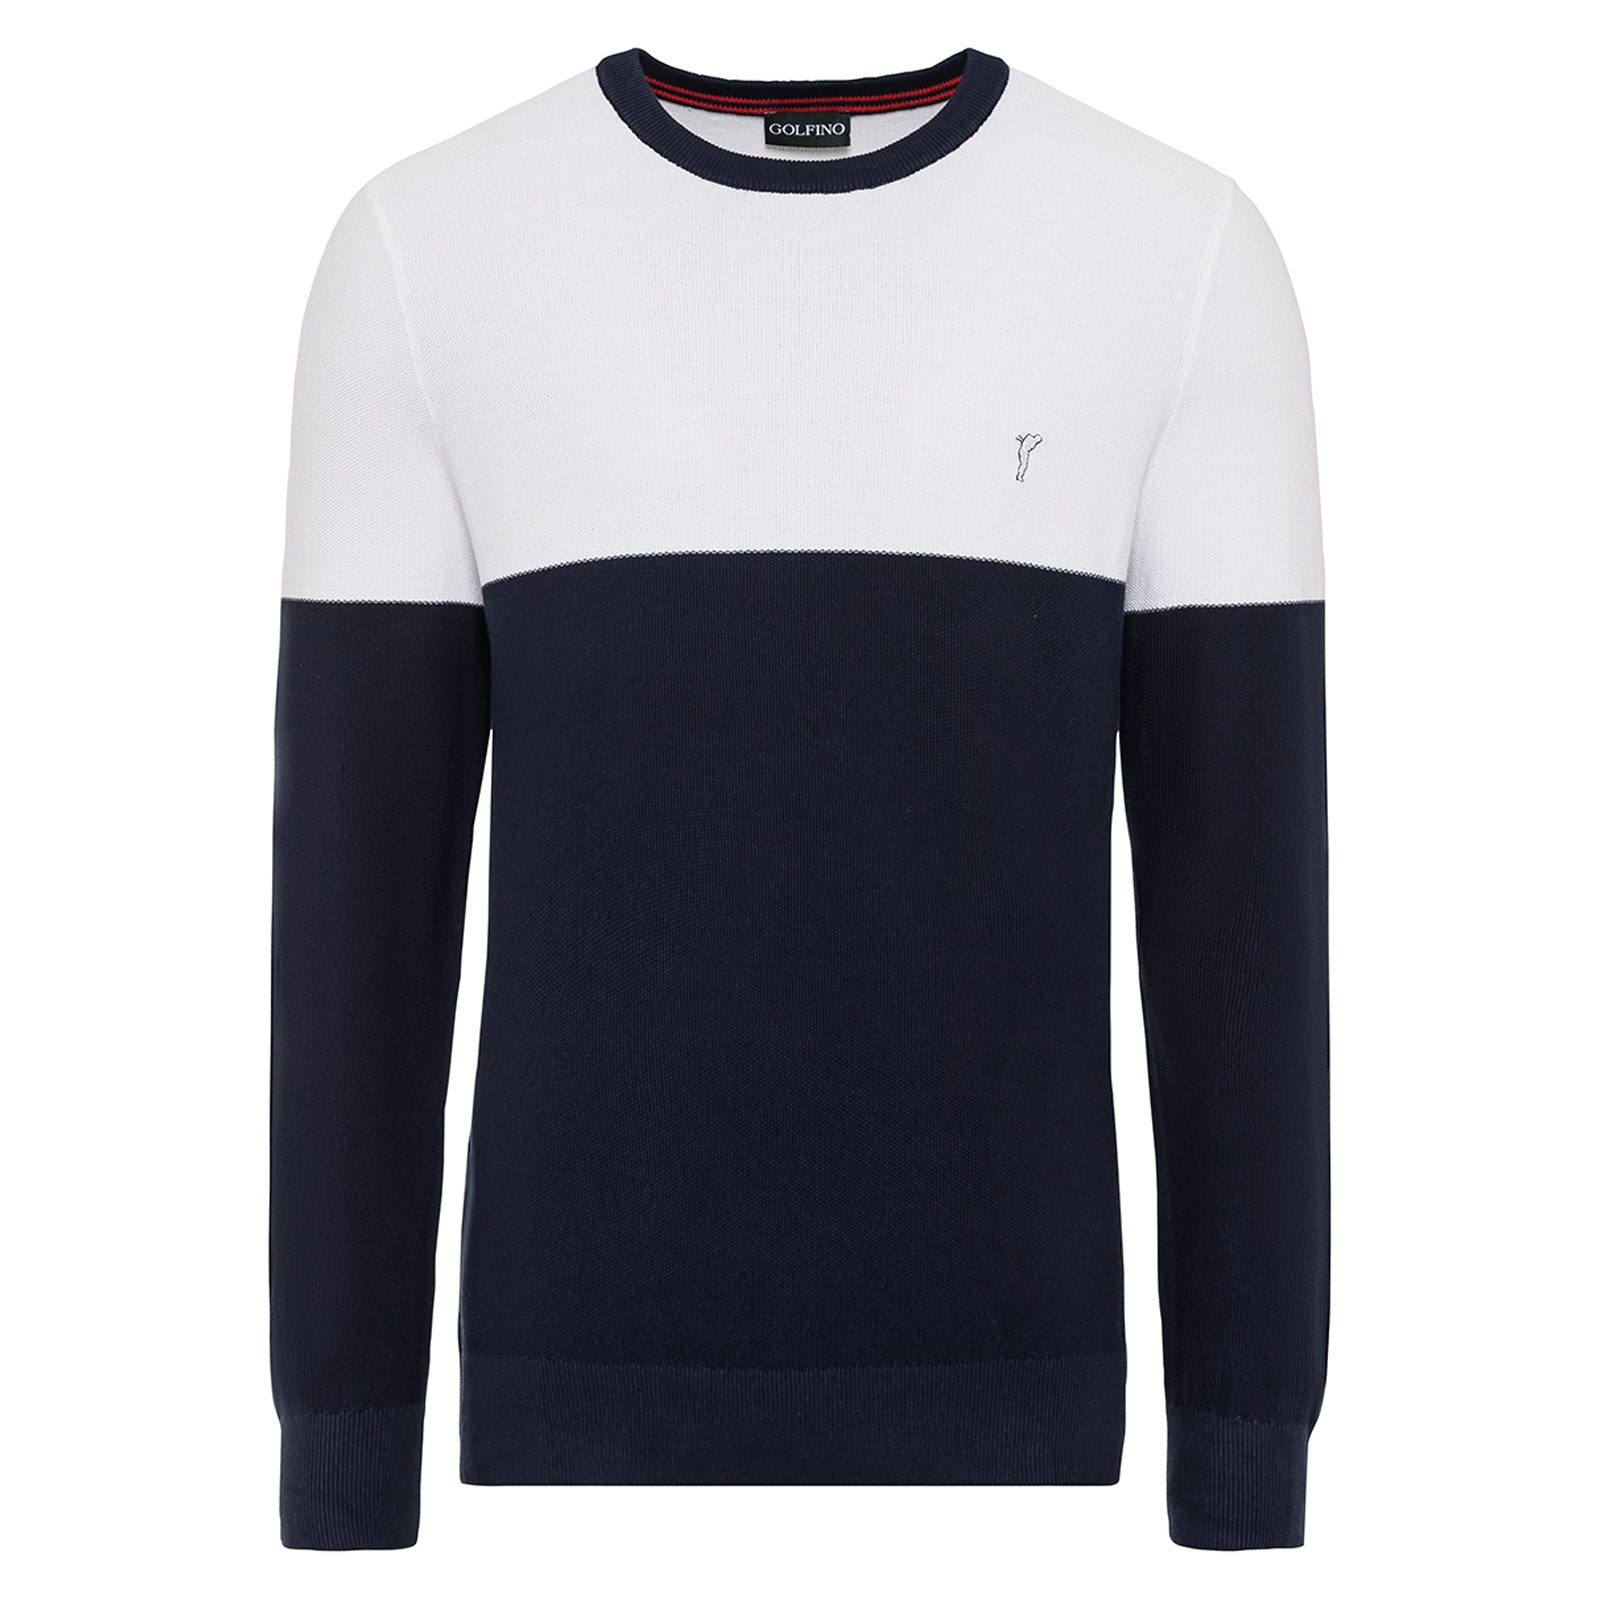 Men's knitted pullover made from particularly soft cotton with round neckline